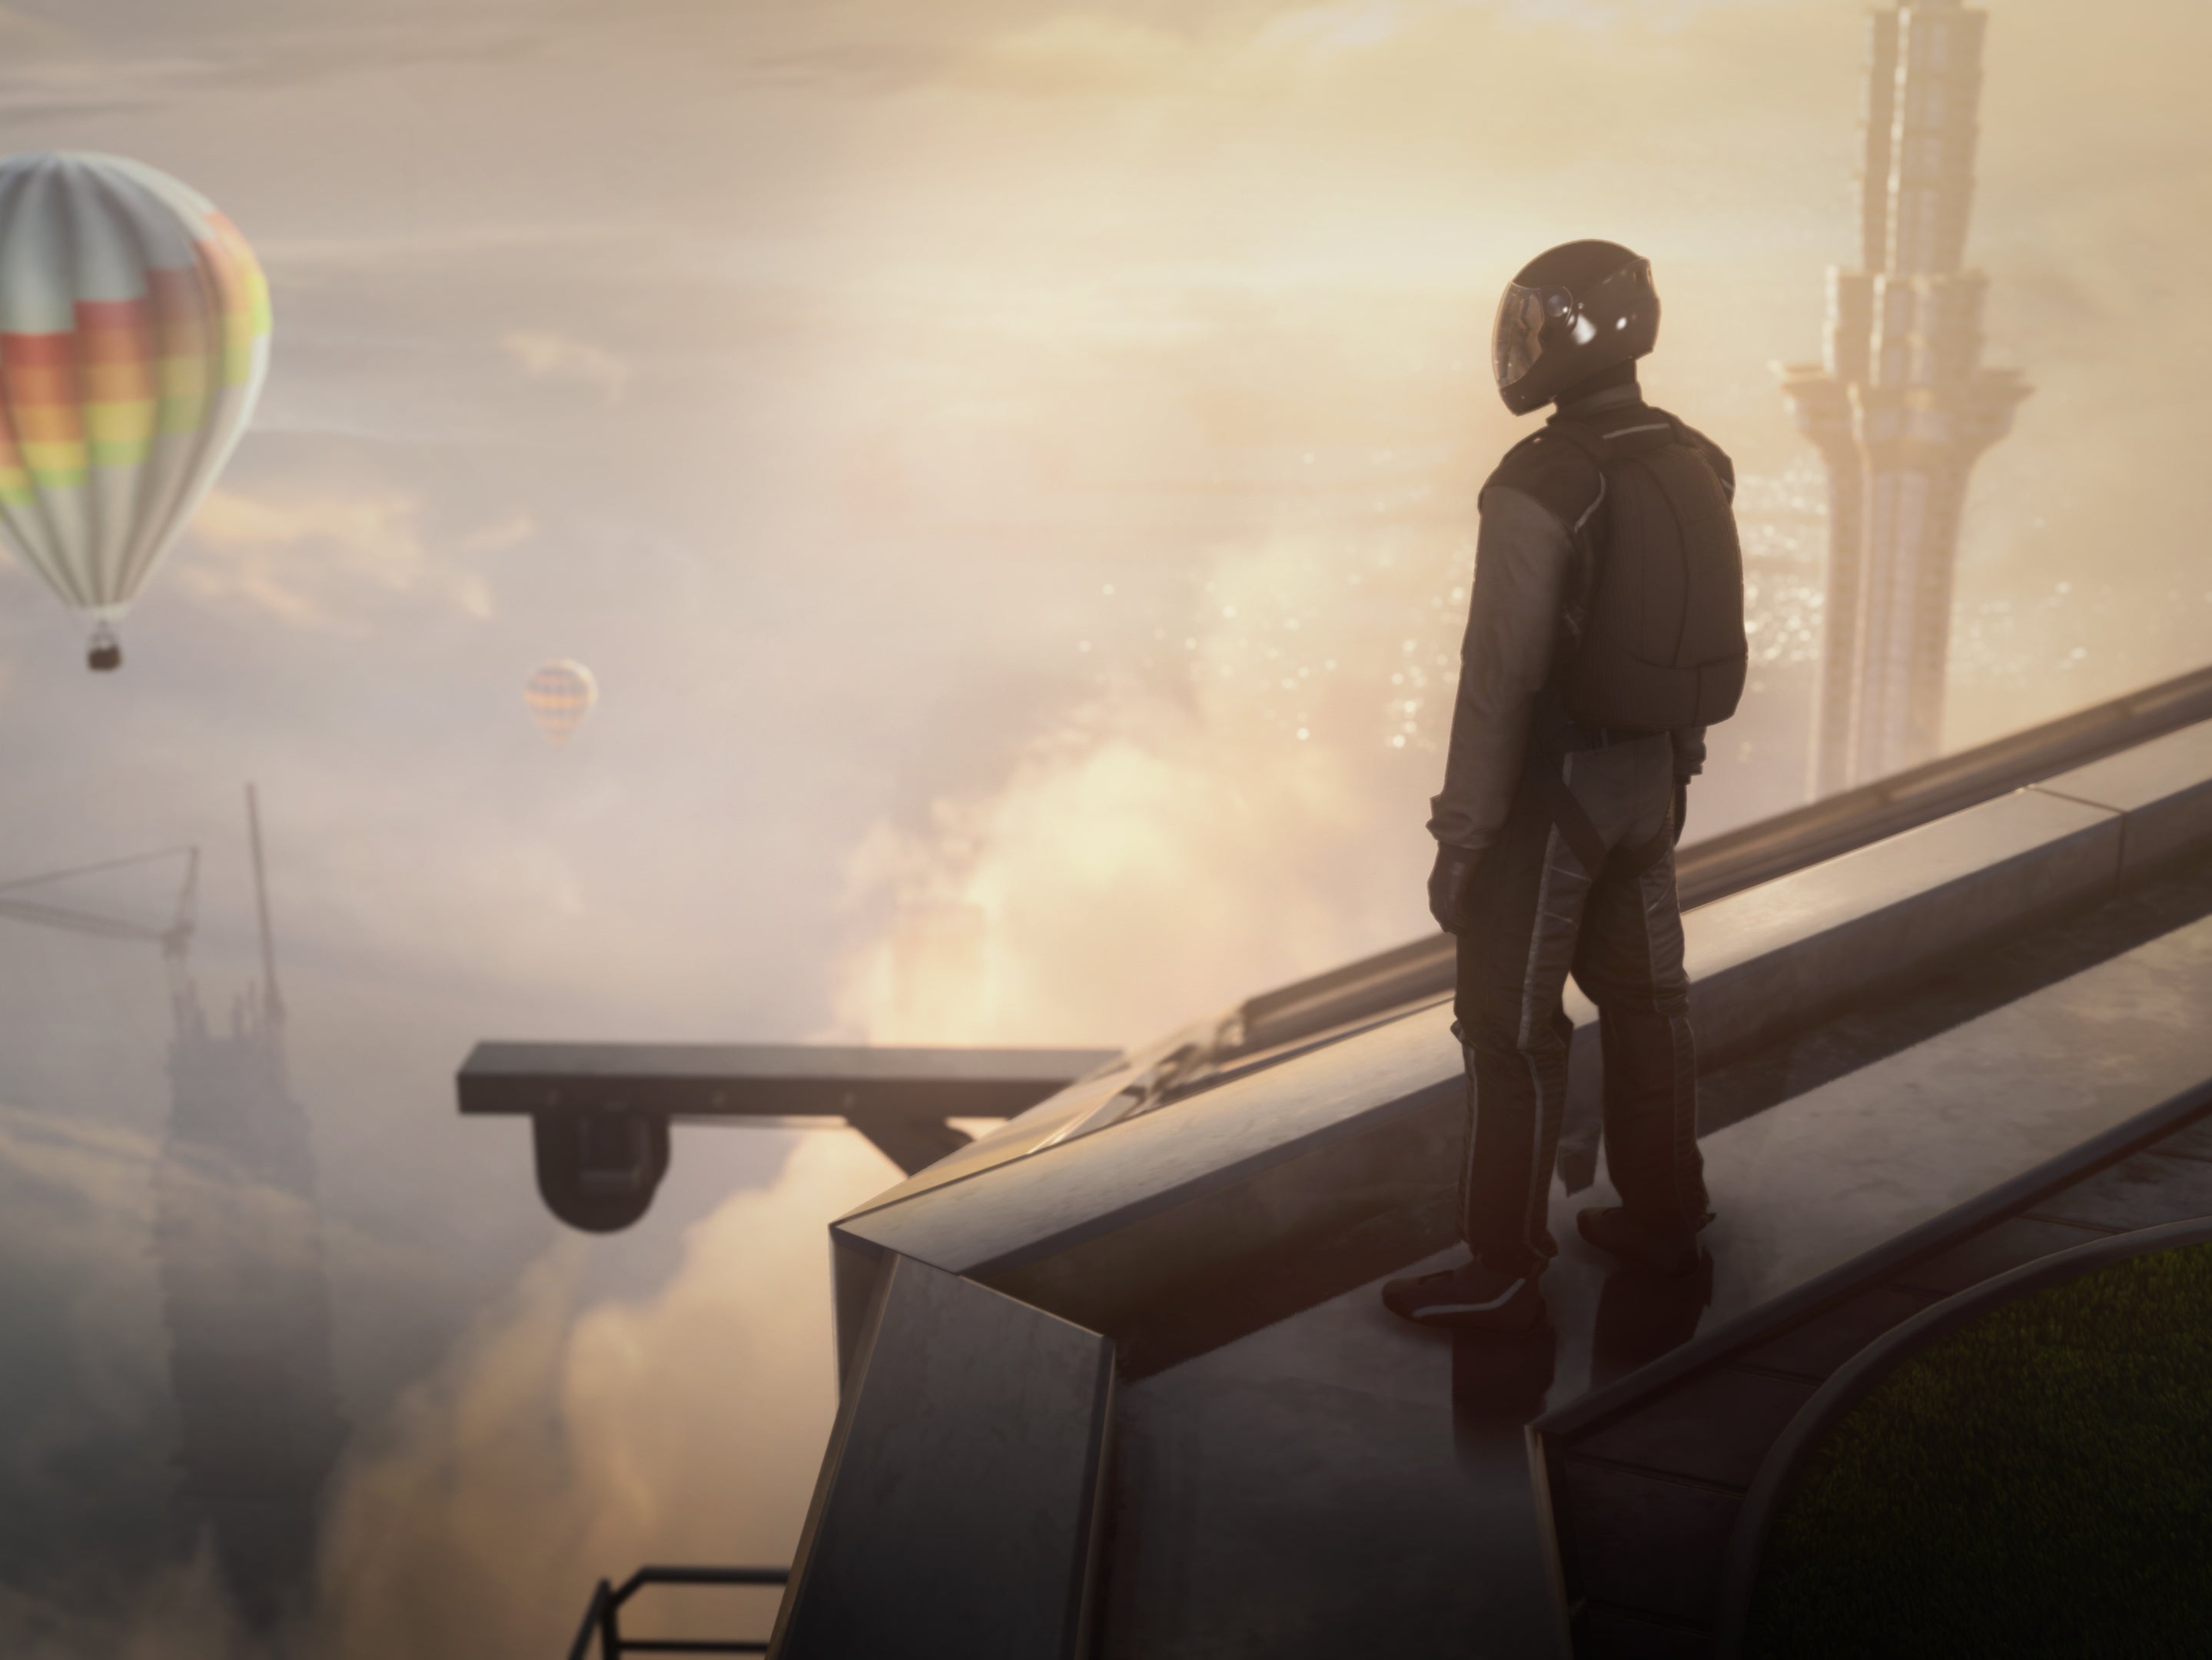 Agent 47 stands atop a skyscraper in the game’s first mission